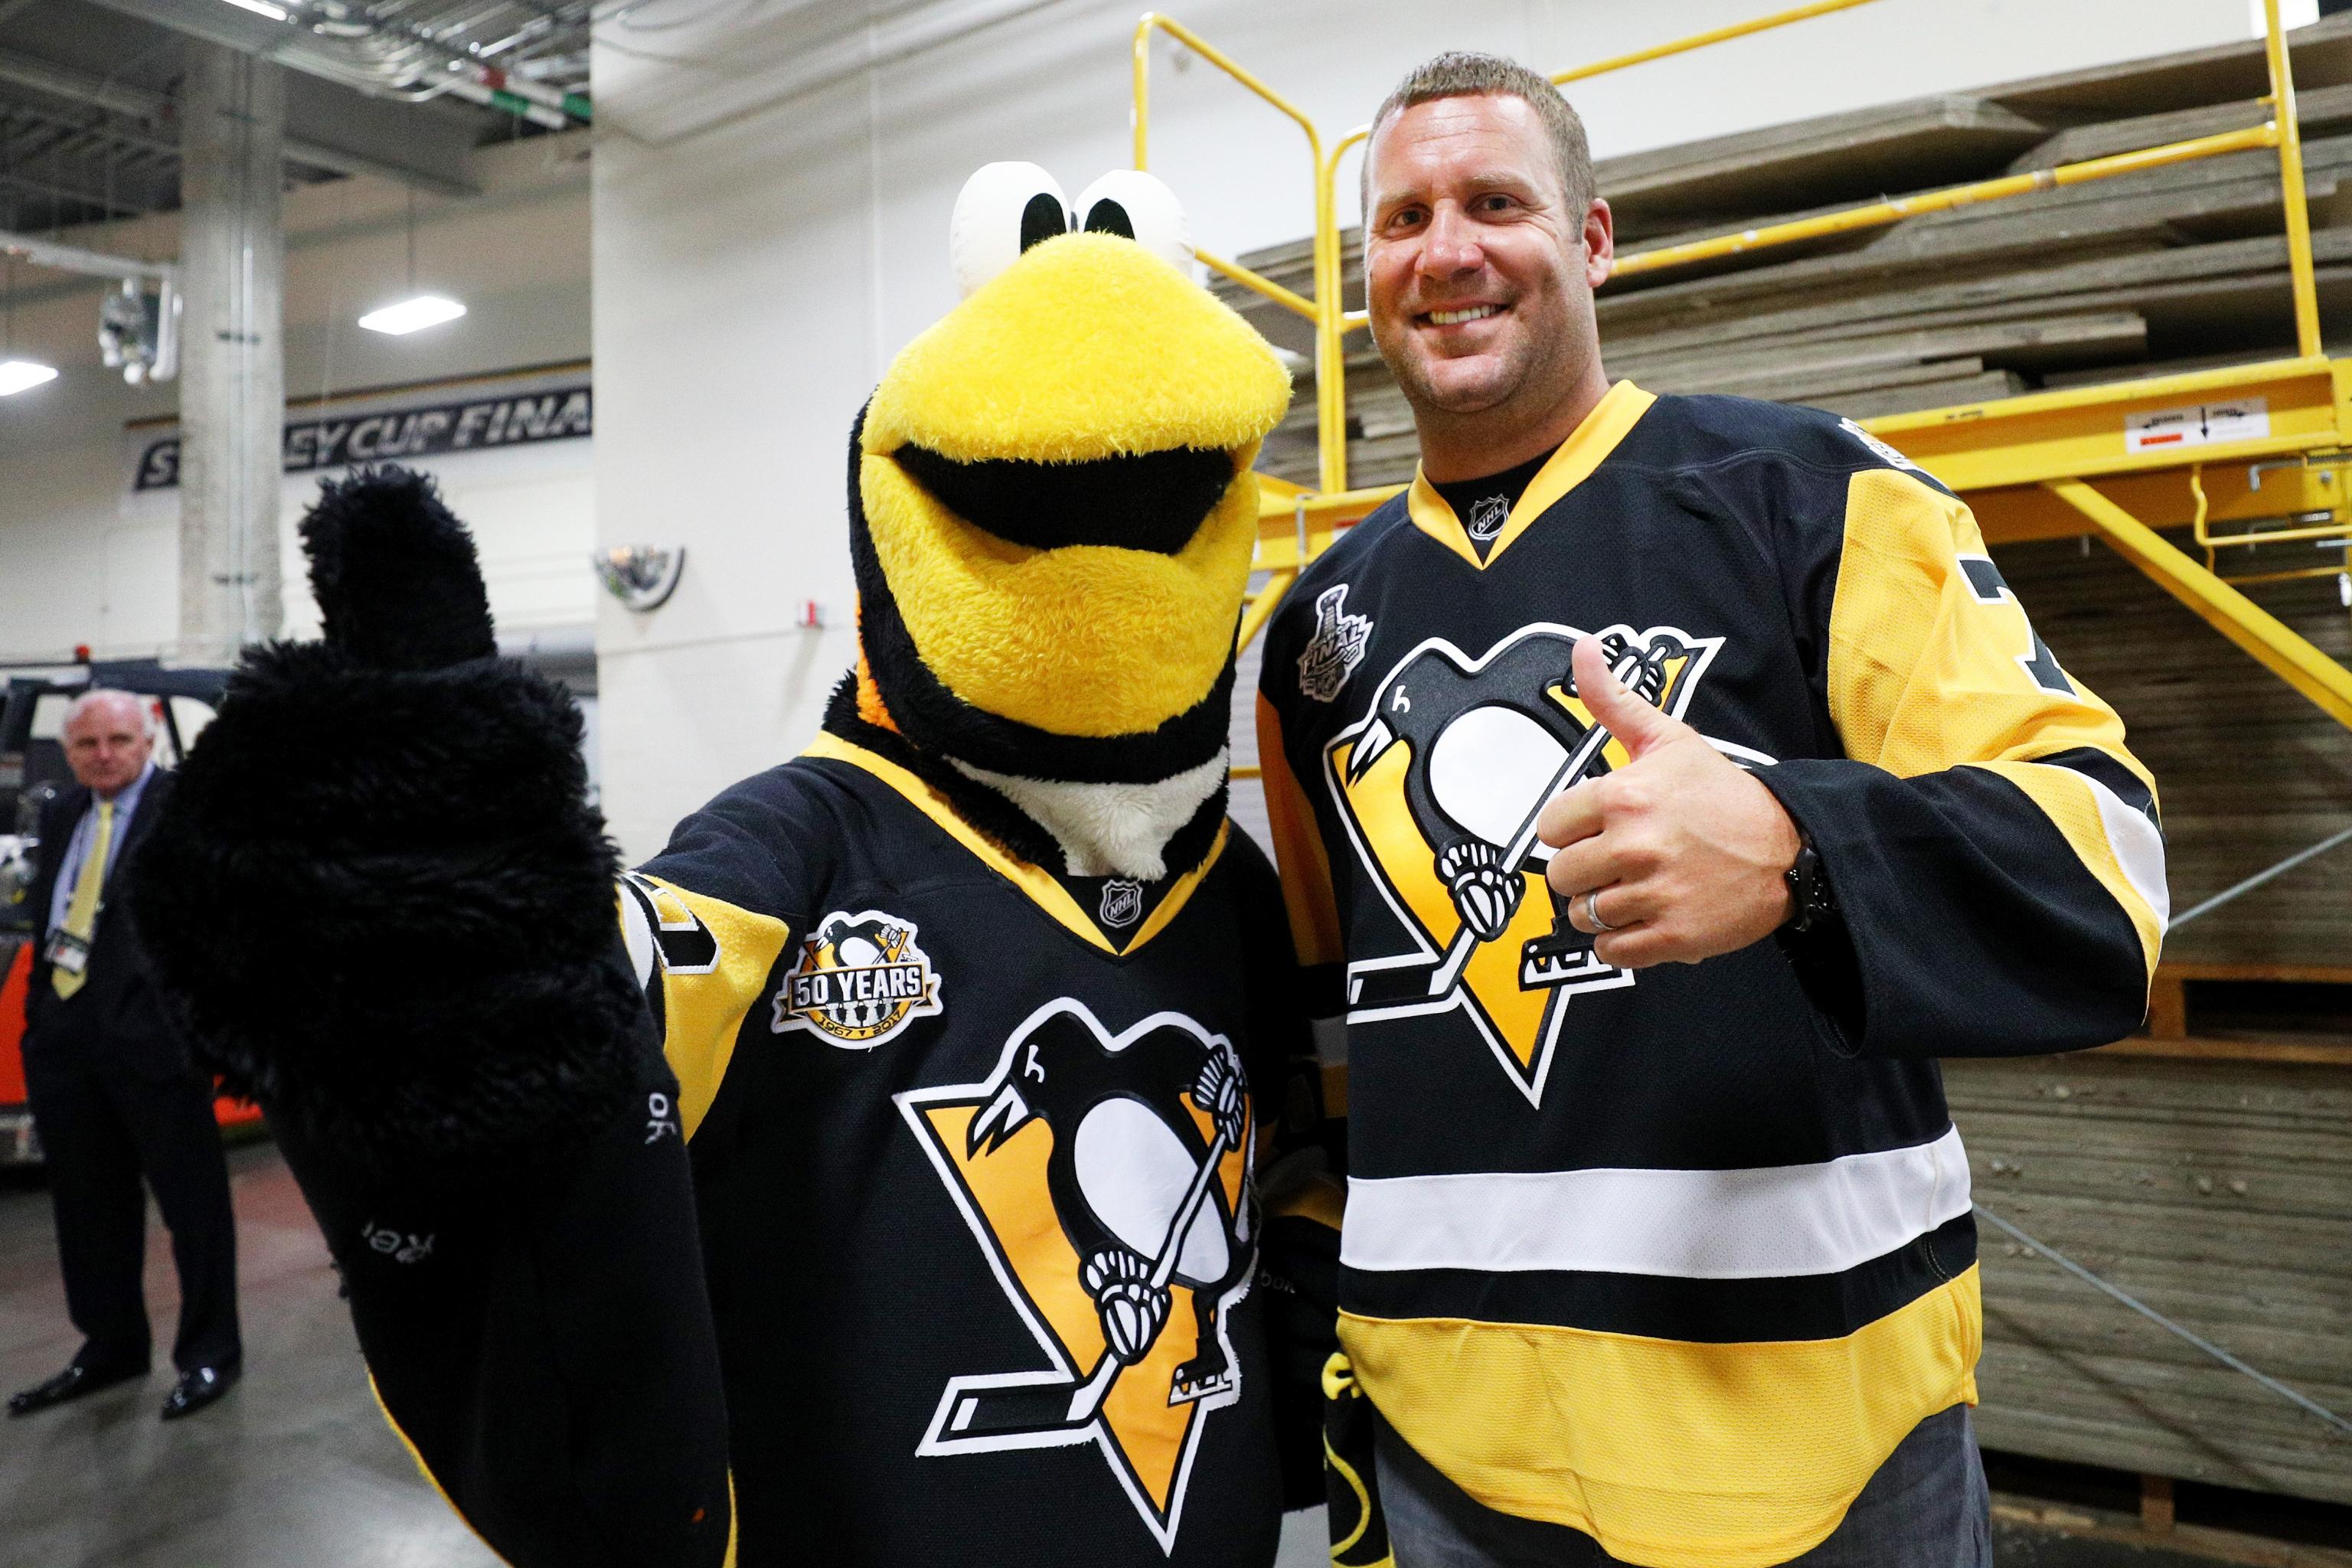 Steelers' Ben Roethlisberger, Mike Tomlin Attend Capitals vs